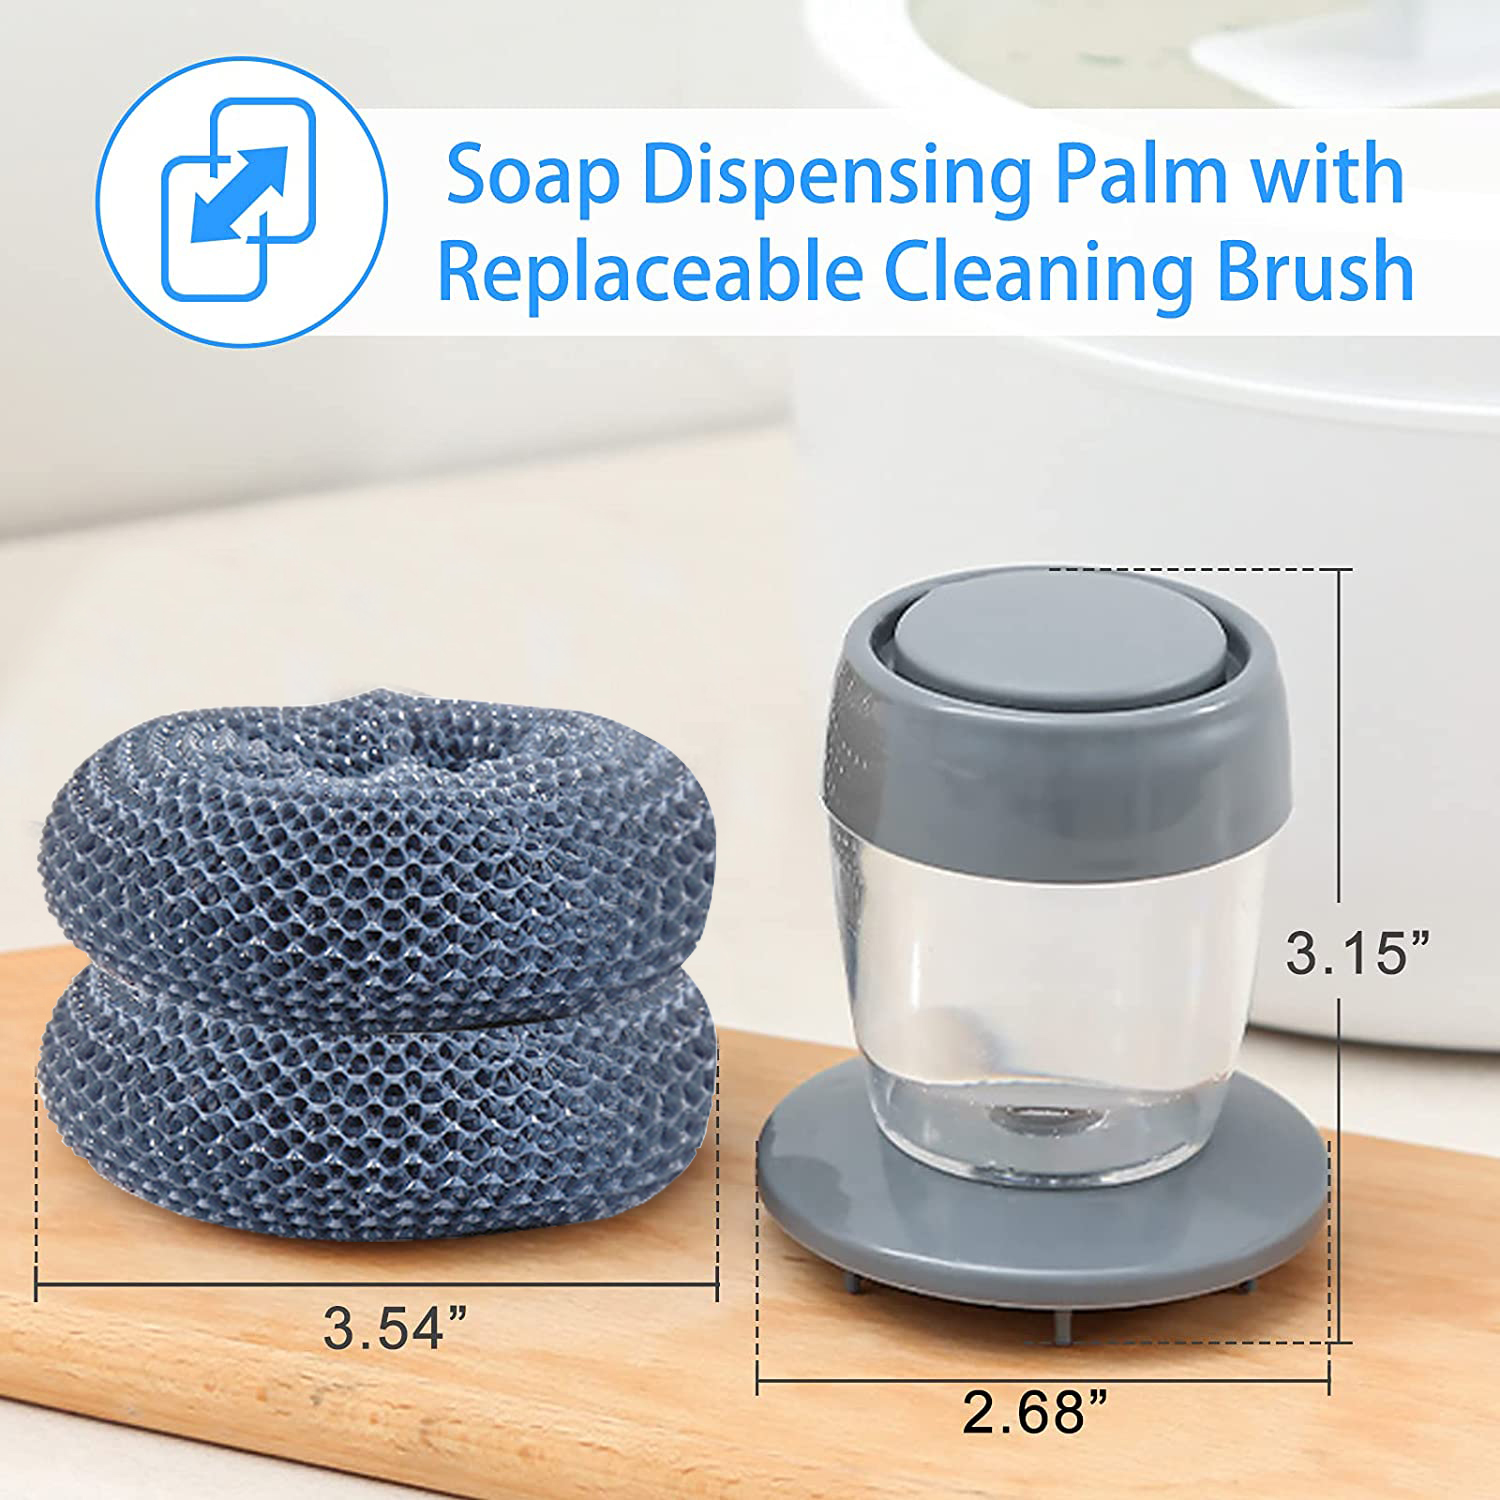 🔥(HOT SALE - 50% OFF) Soap Dispensing Palm Brush Storage Set With 2 PET Replacement Heads